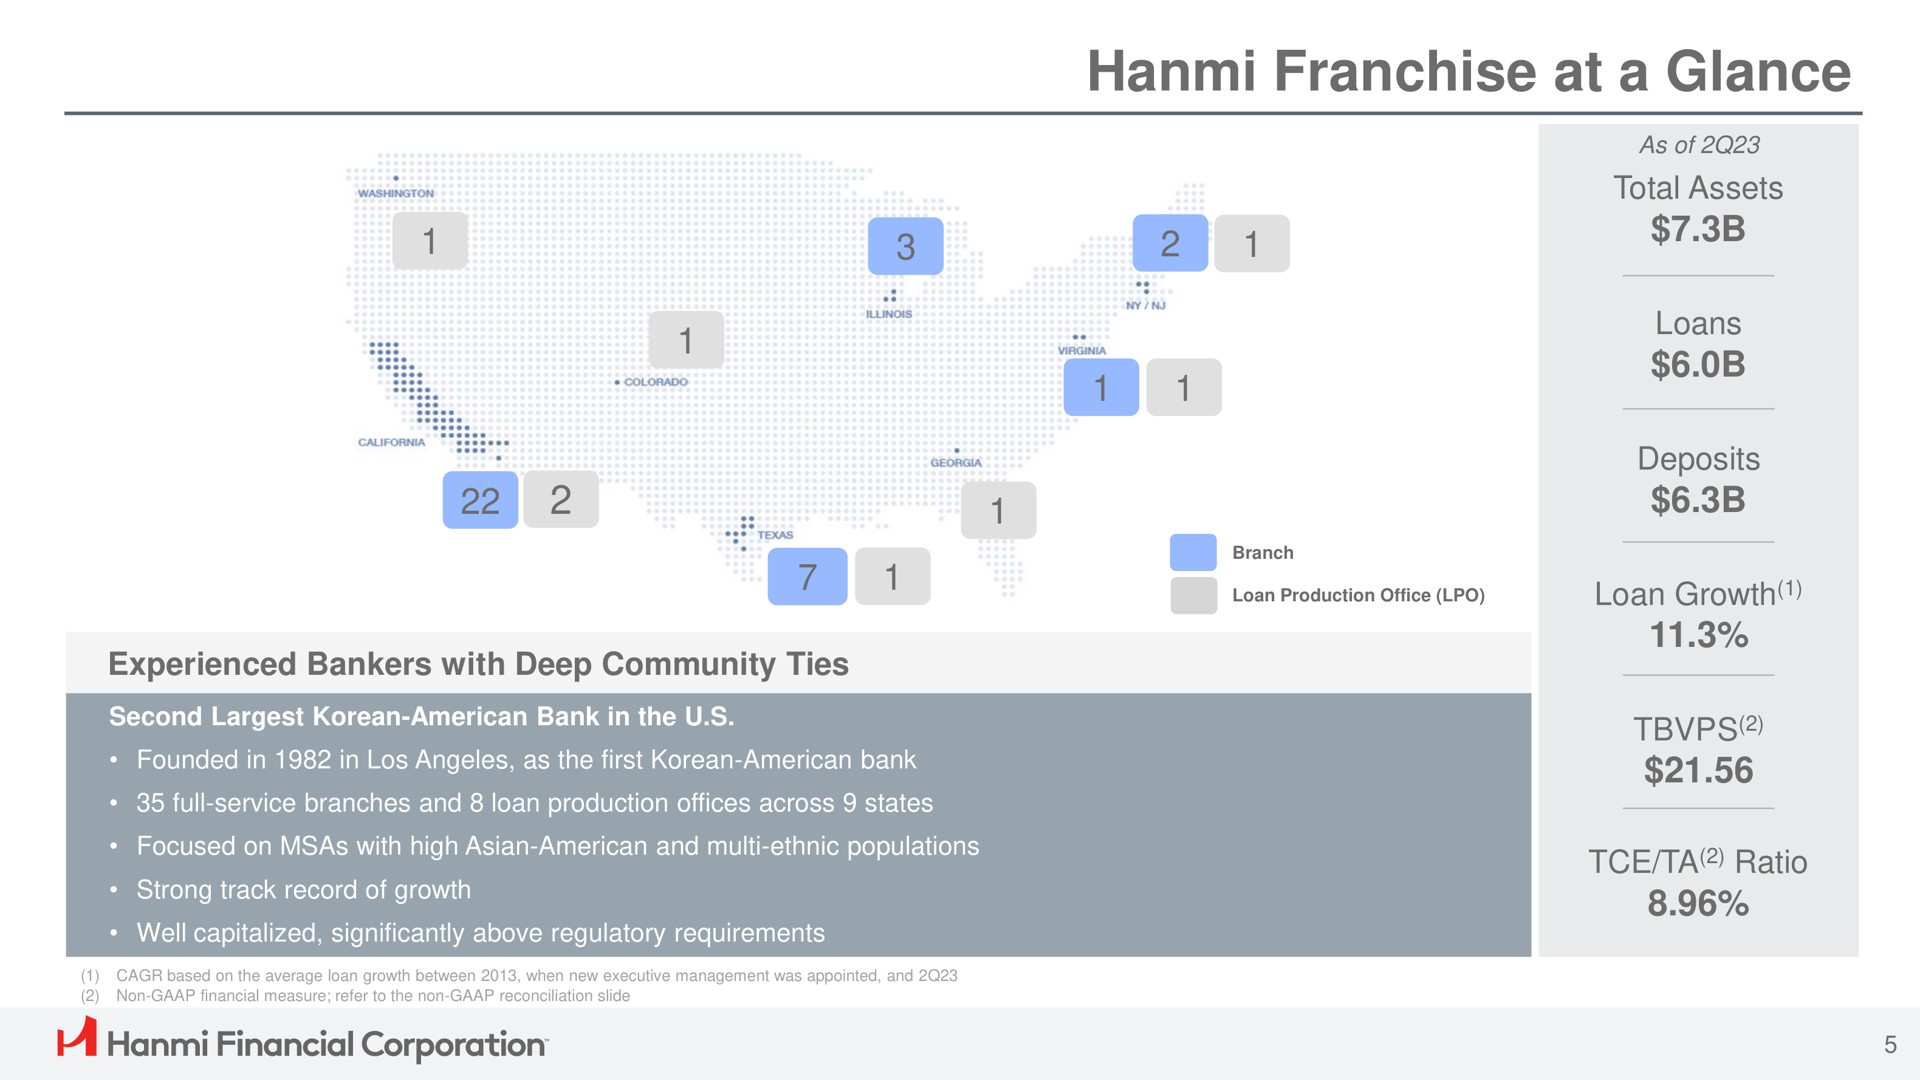 franchise at a glance use he financial corporation loans | Hanmi Financial